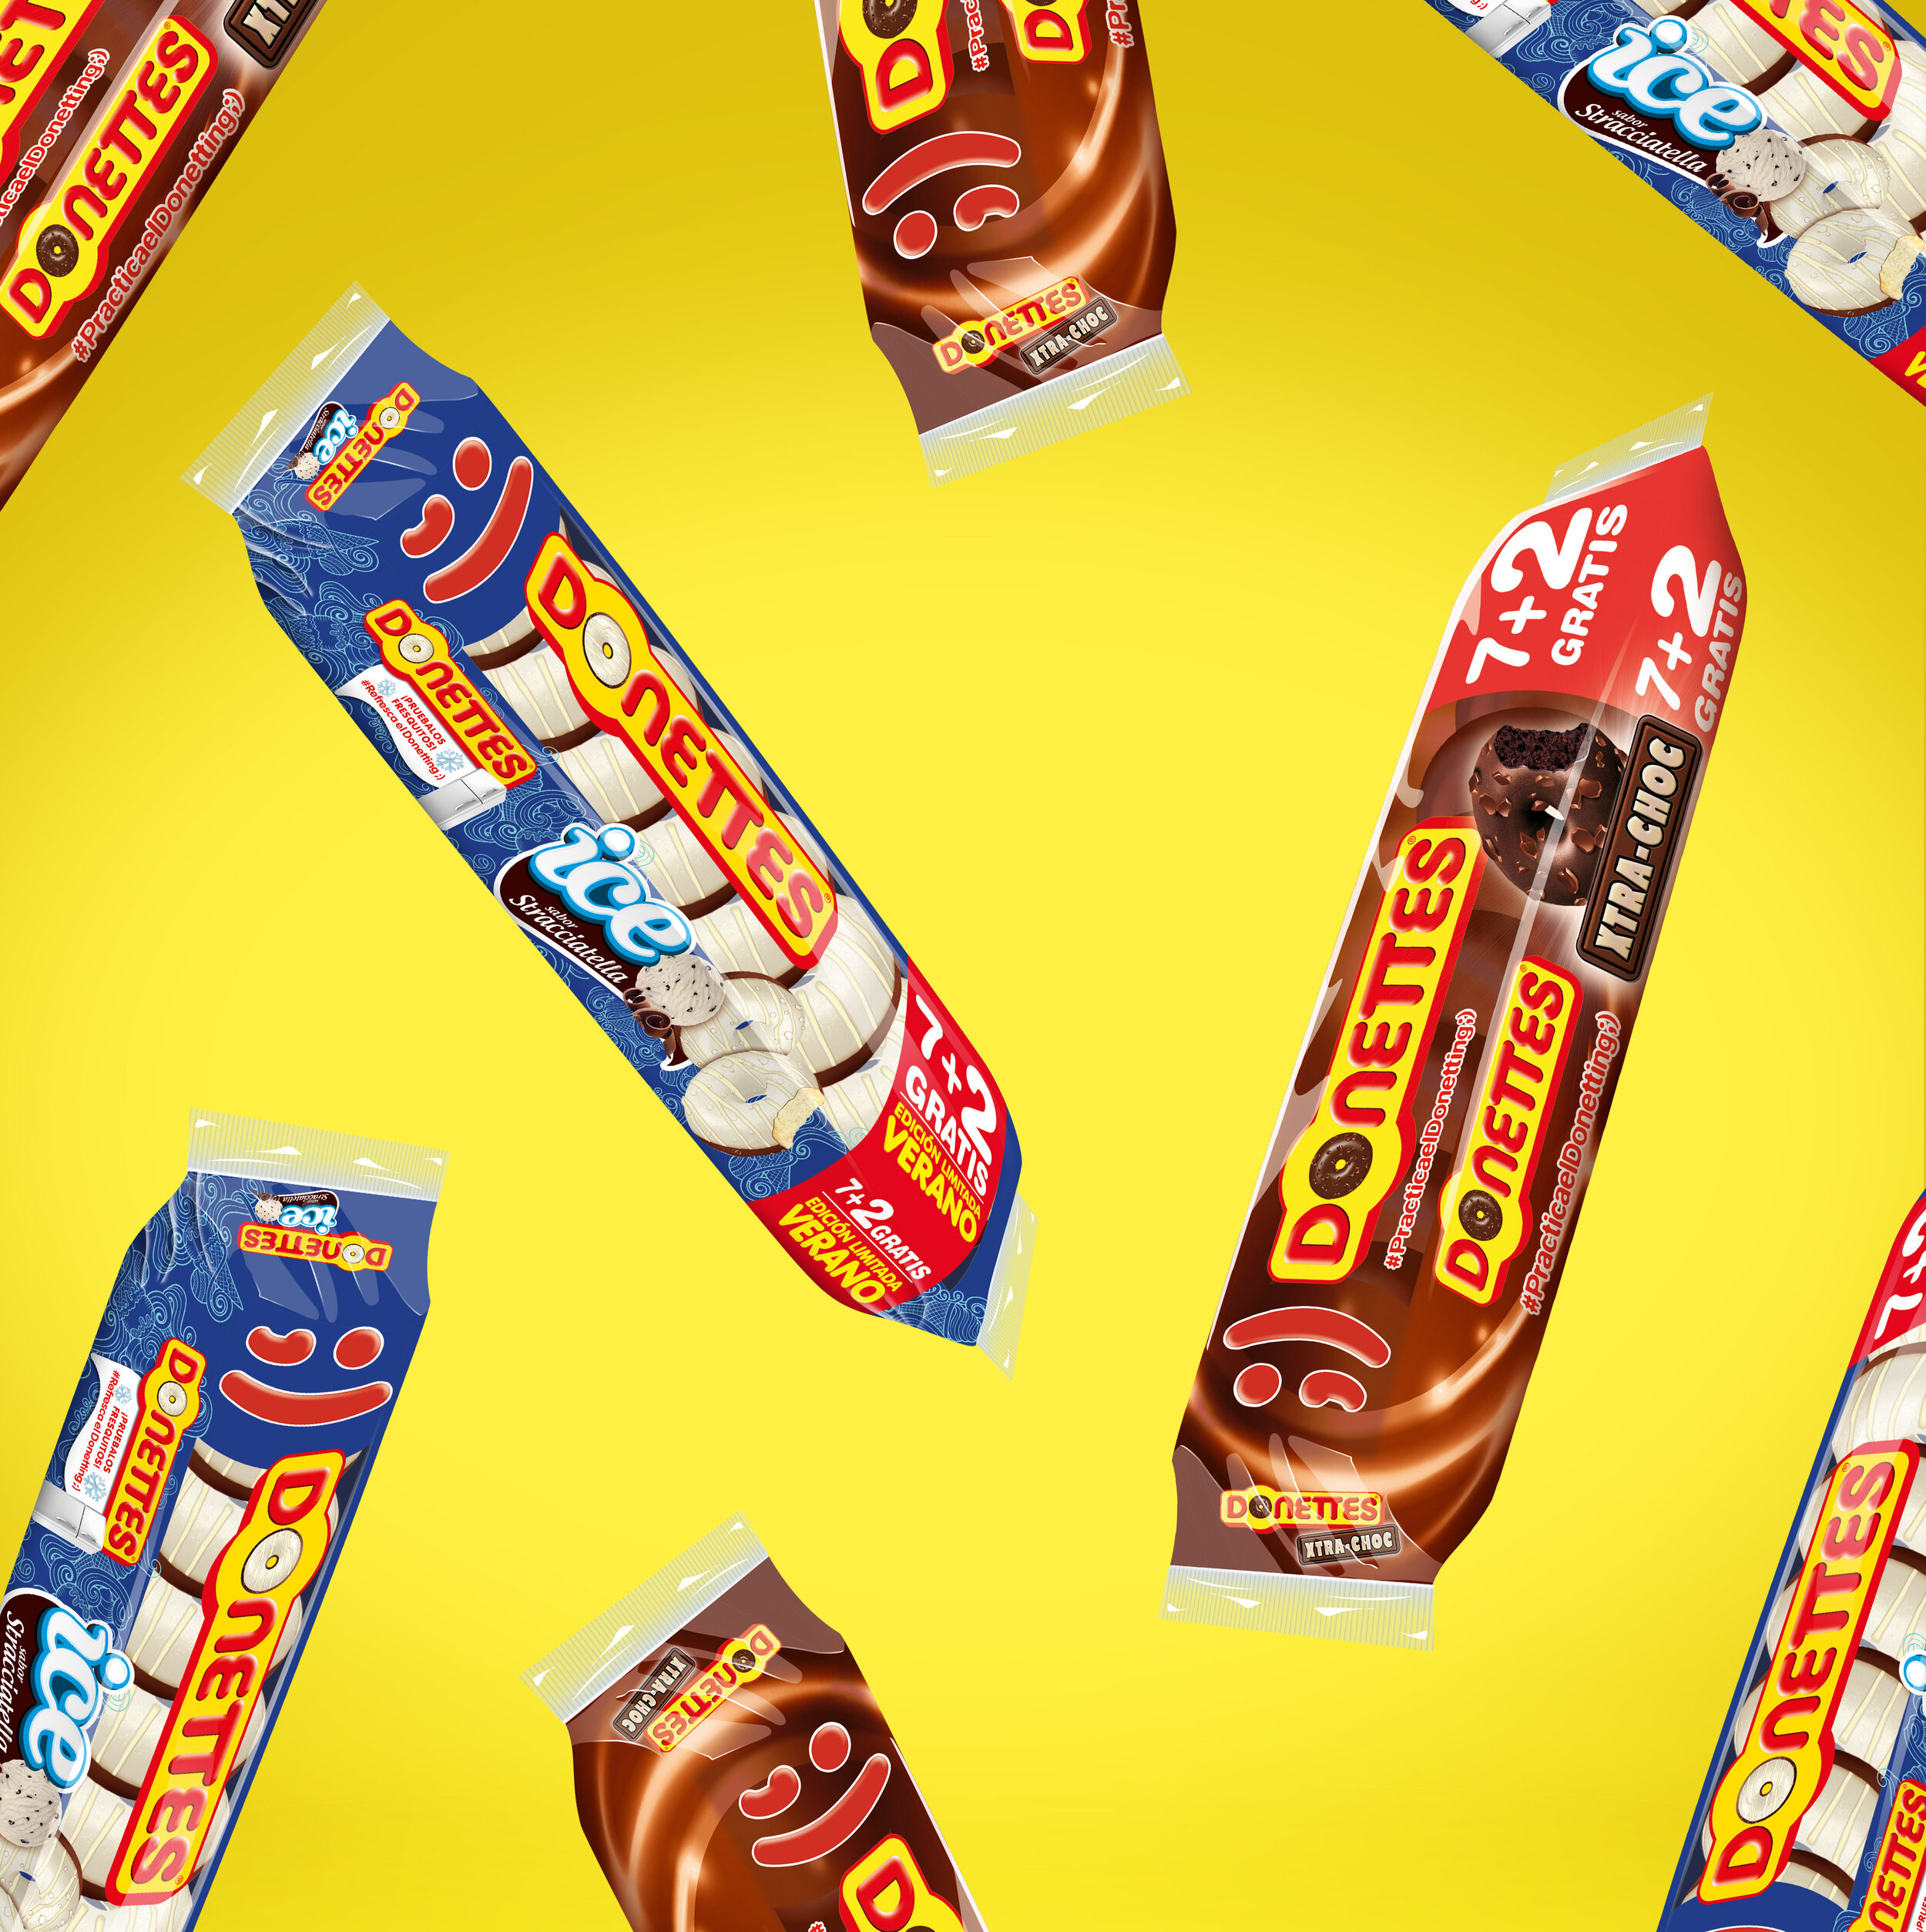 Donettes-Limited-Editions_04.jpg